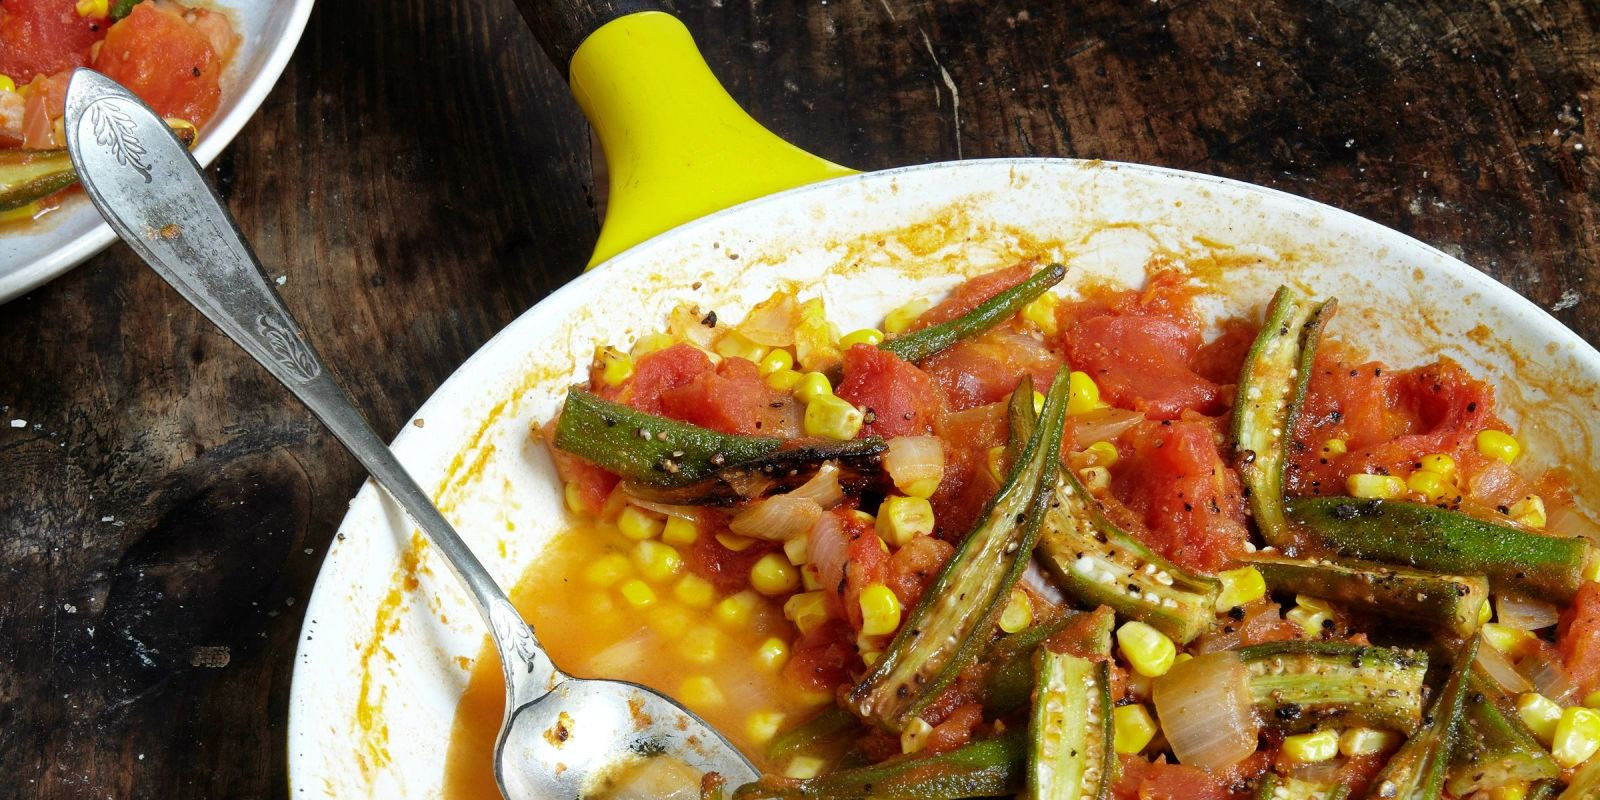 Summer Cook Out Side Dishes
 The Perfect Summer Side Dish for a Cookout